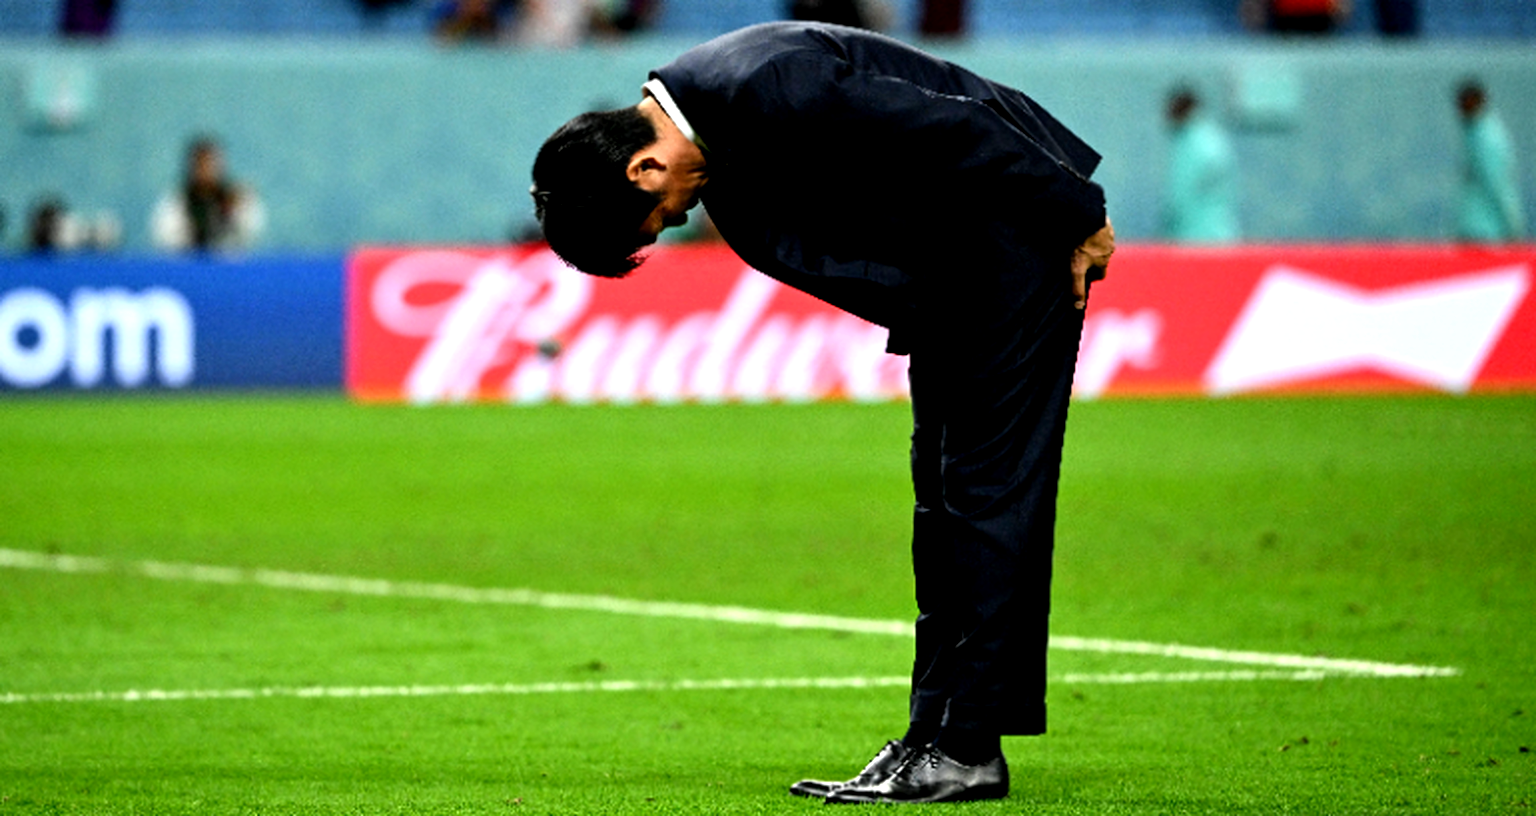 Japan coach bows to crowd after Japan eliminated from World Cup